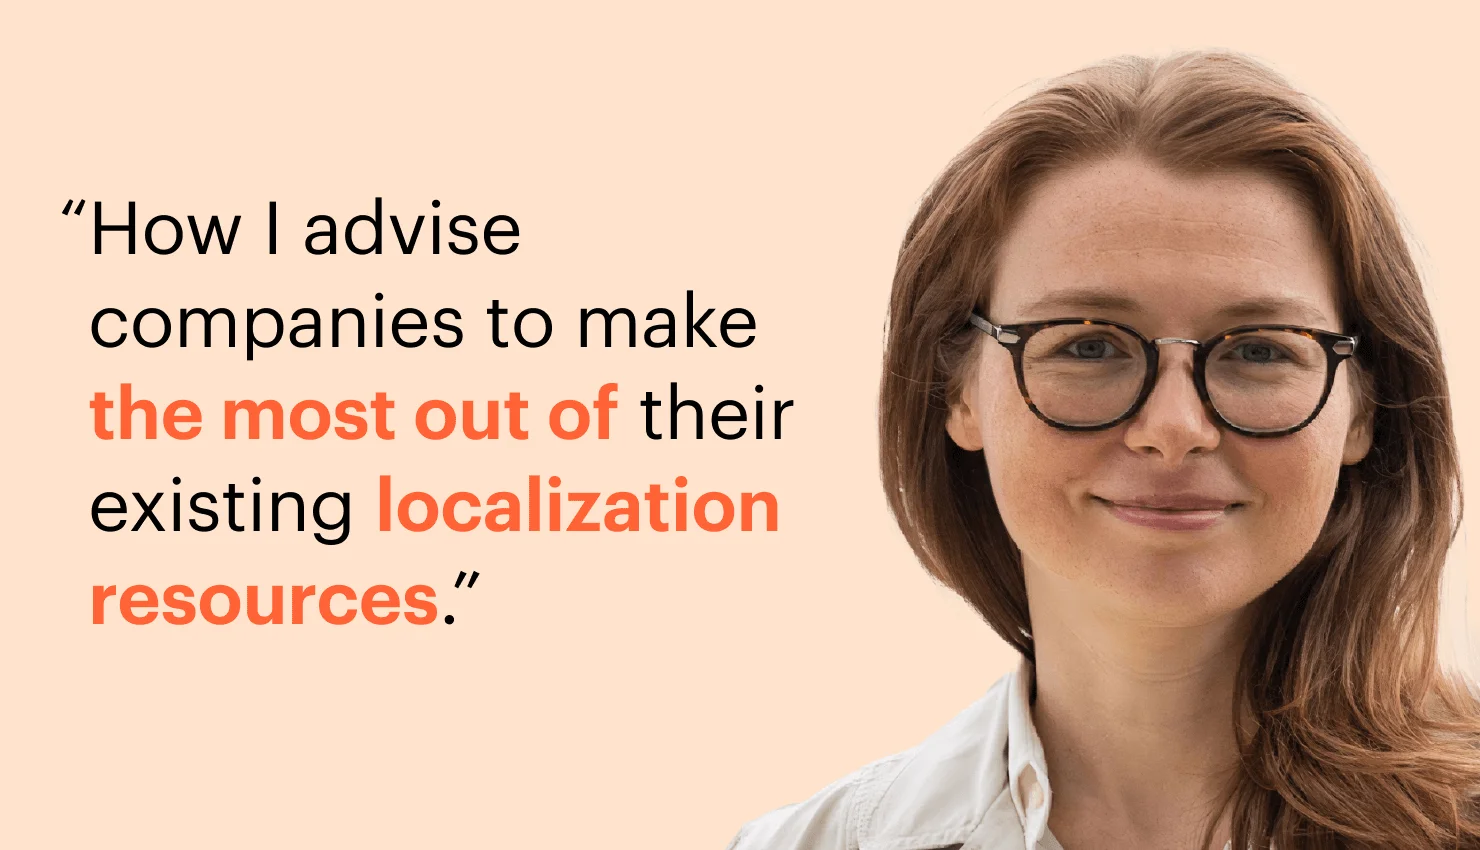 Localization manager with quote: "How I advise companies to make the most out of their localization resources"